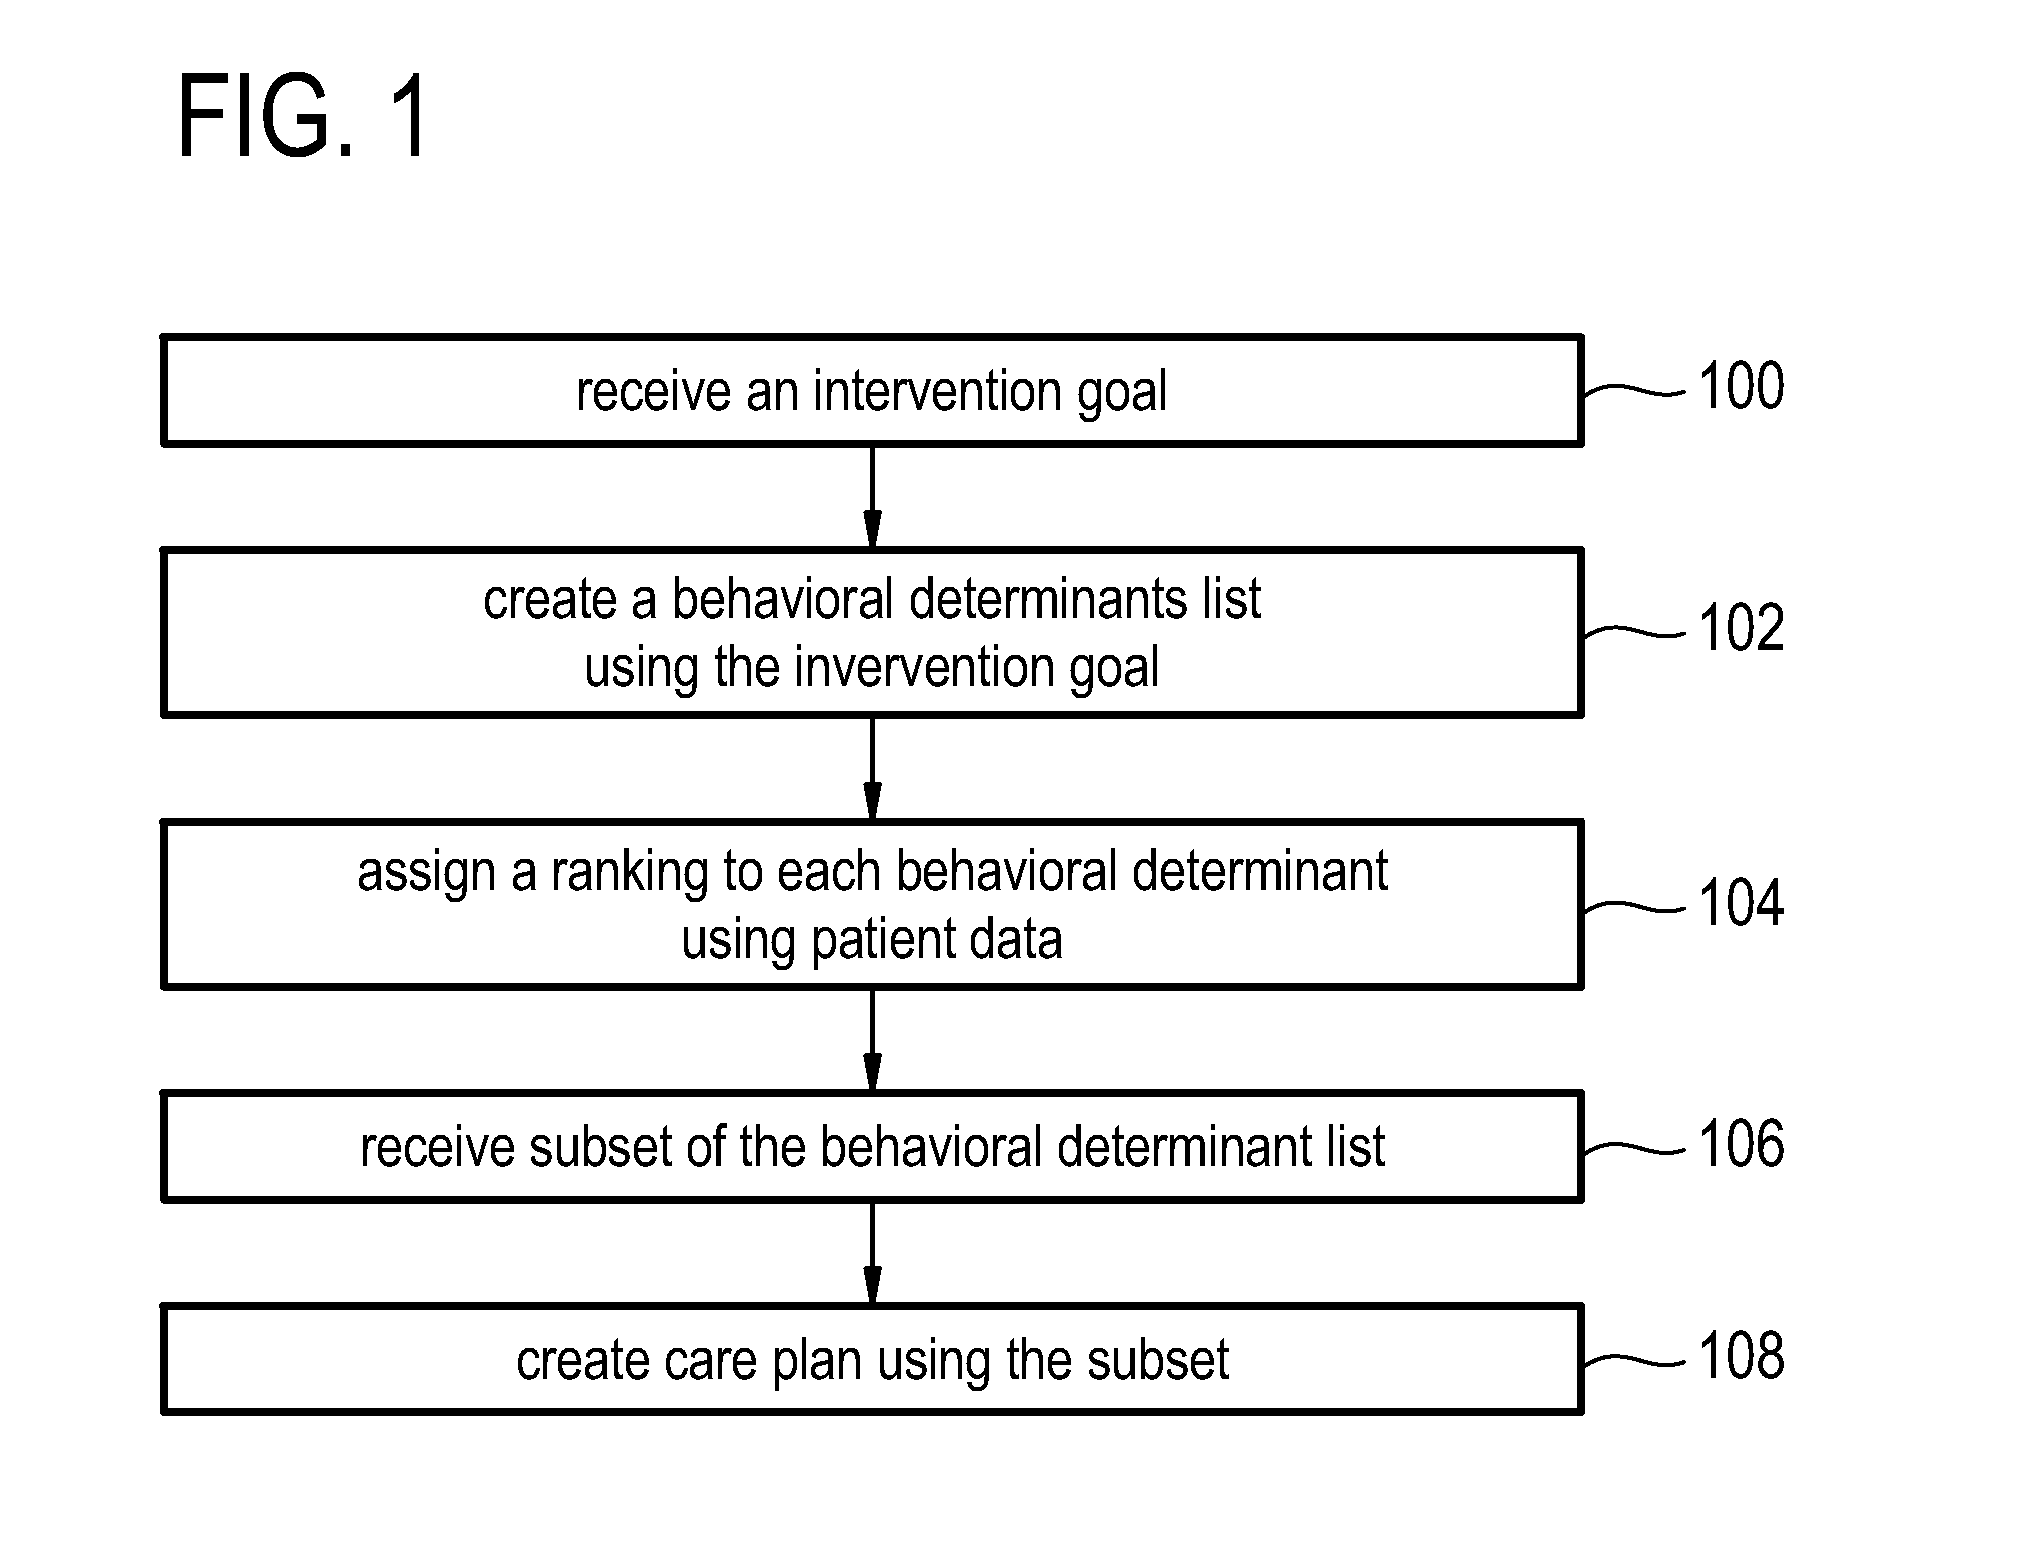 Computer-implemented method, clinical decision support system, and computer-readable non-transitory storage medium for creating a care plan